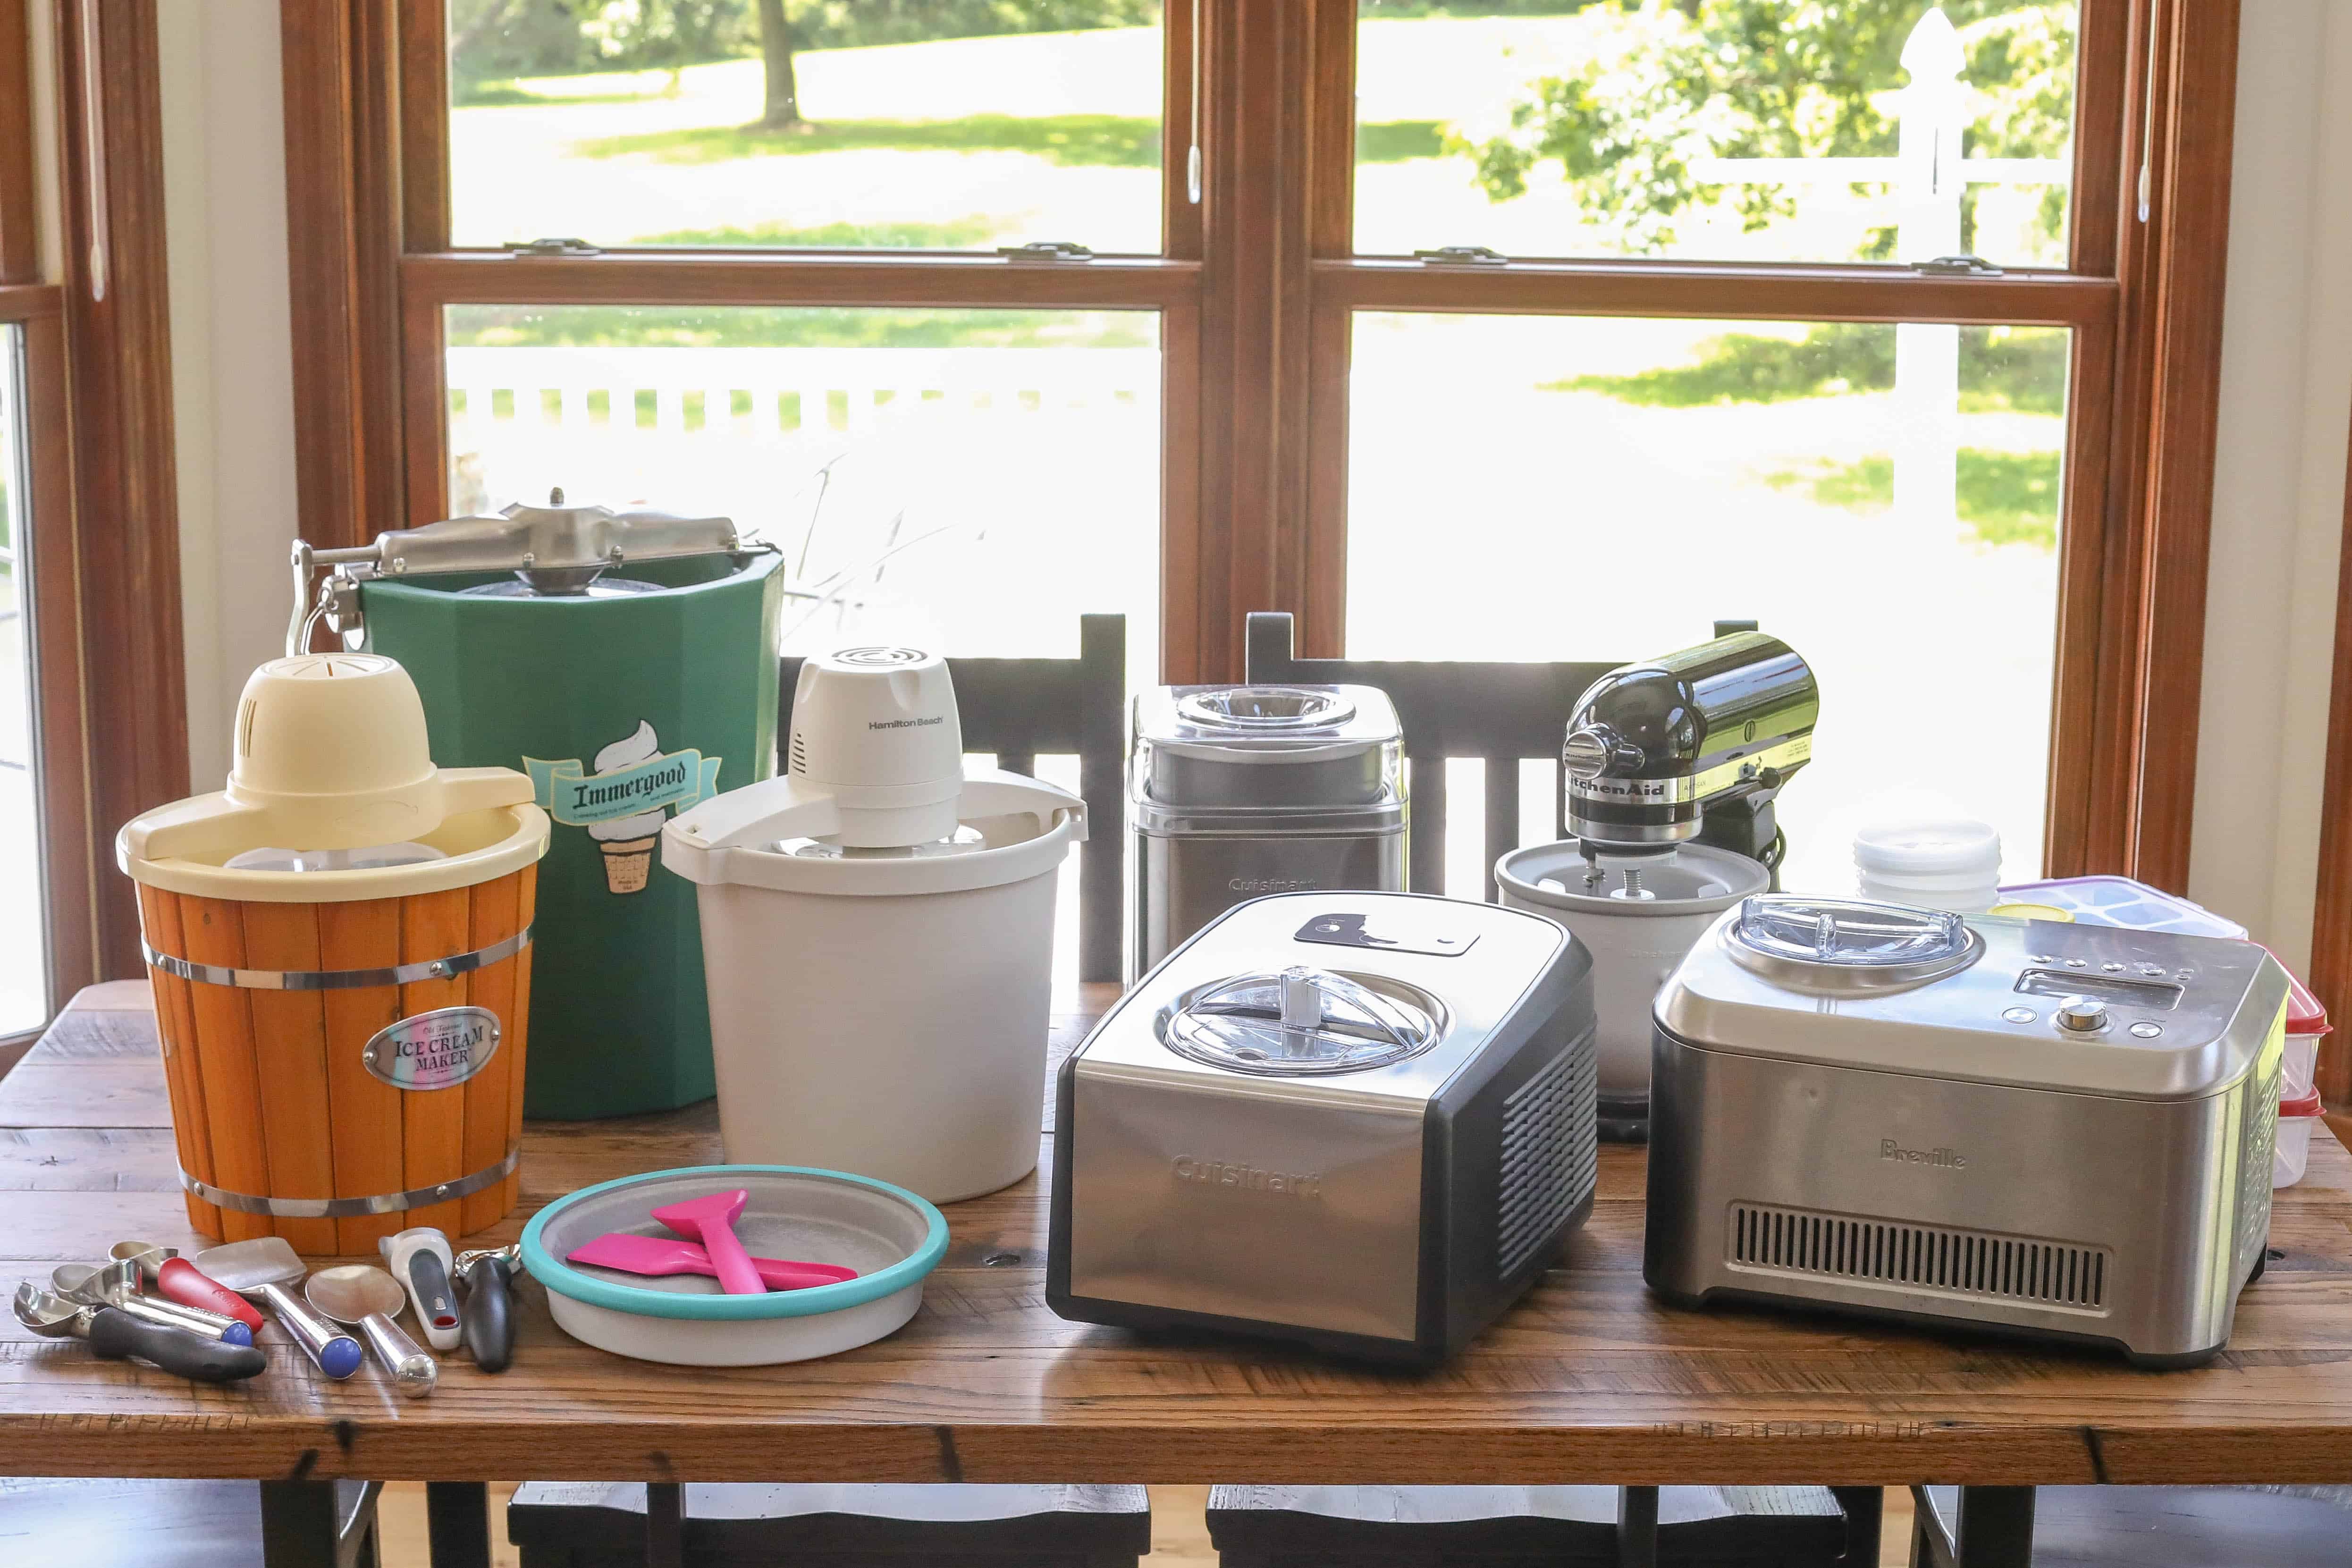 The best ice cream makers to use at home